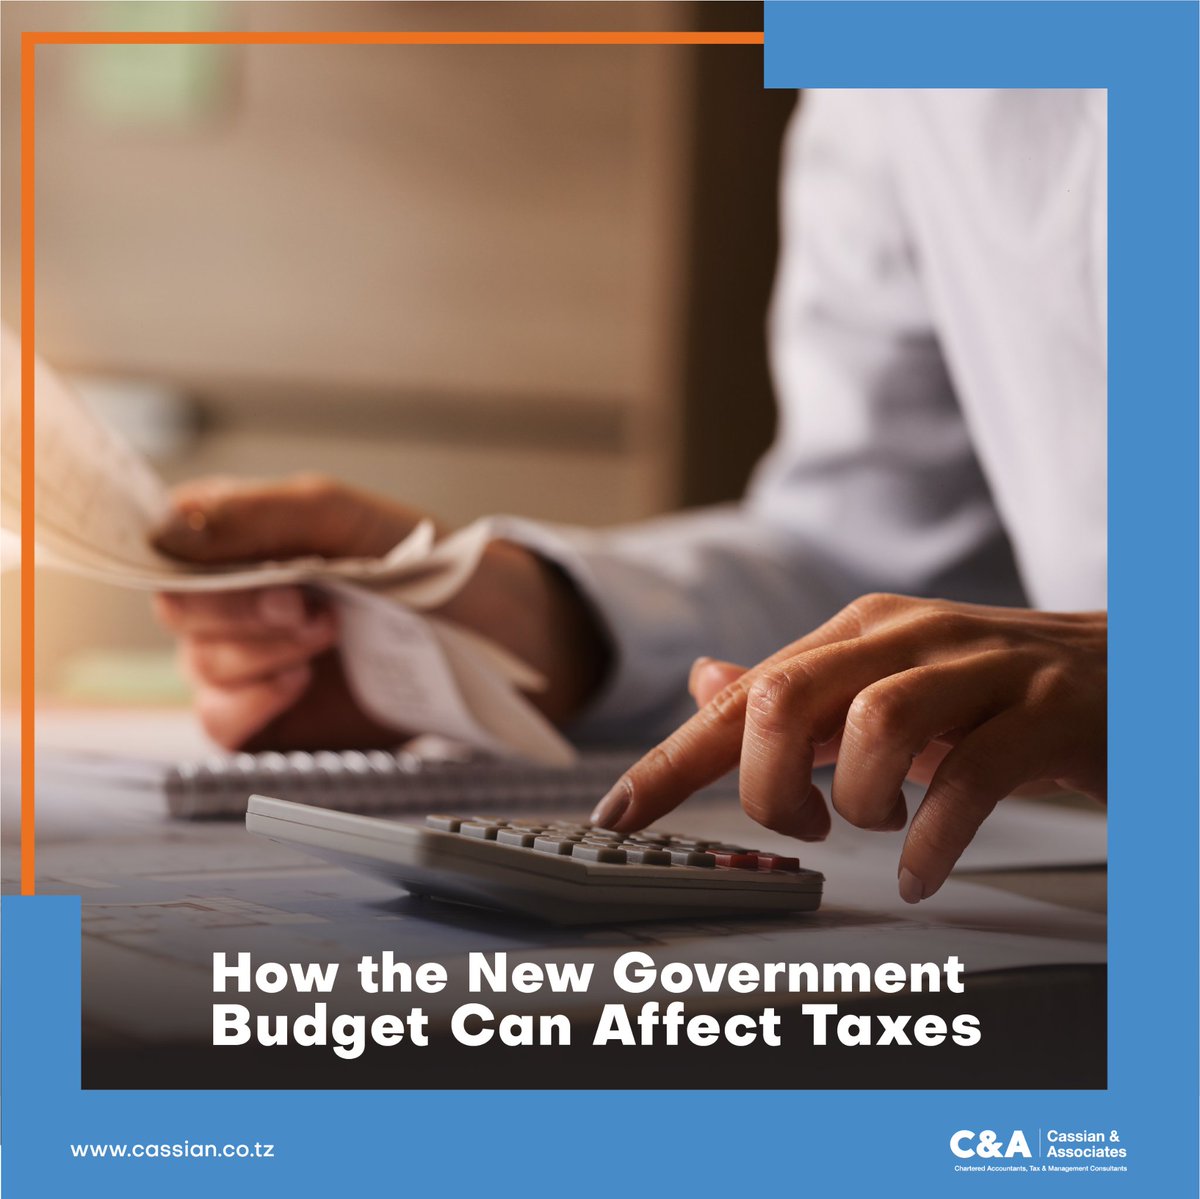 The effects of the new government budget  can mean: 
A raise in operational costs.
A reduce your profits.
Increase in ability to invest and expand. 
New tax laws. 
#Budget2023 #cassianandassociates 
 #BusinessTaxes #TaxImpact #BudgetChanges #Entrepreneurship #StayInformed